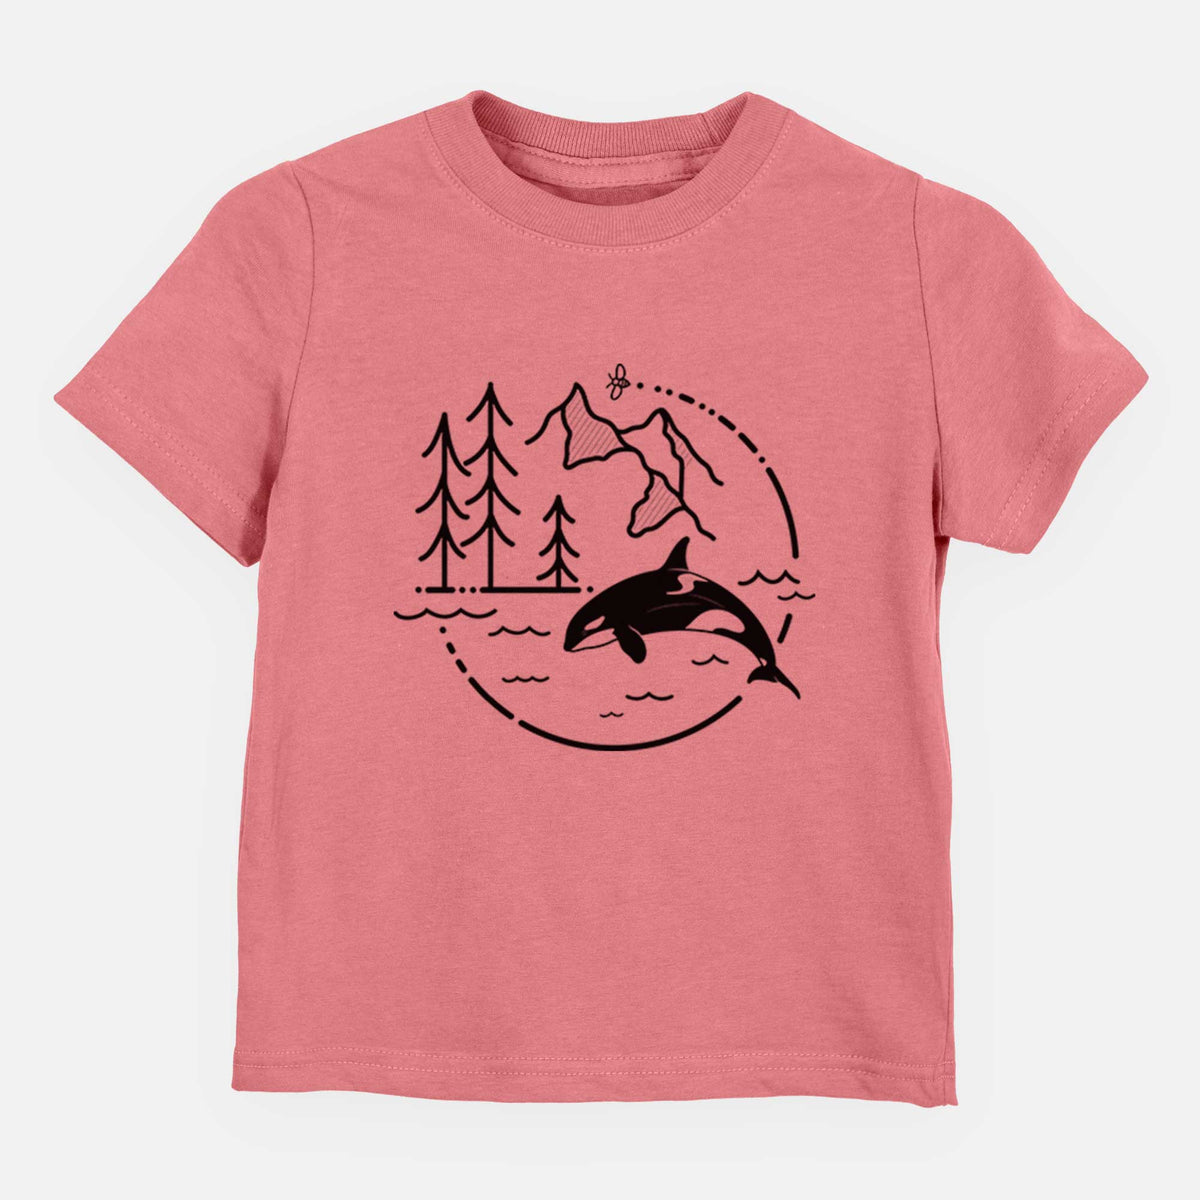 It&#39;s All Connected - Orca - Kids Shirt